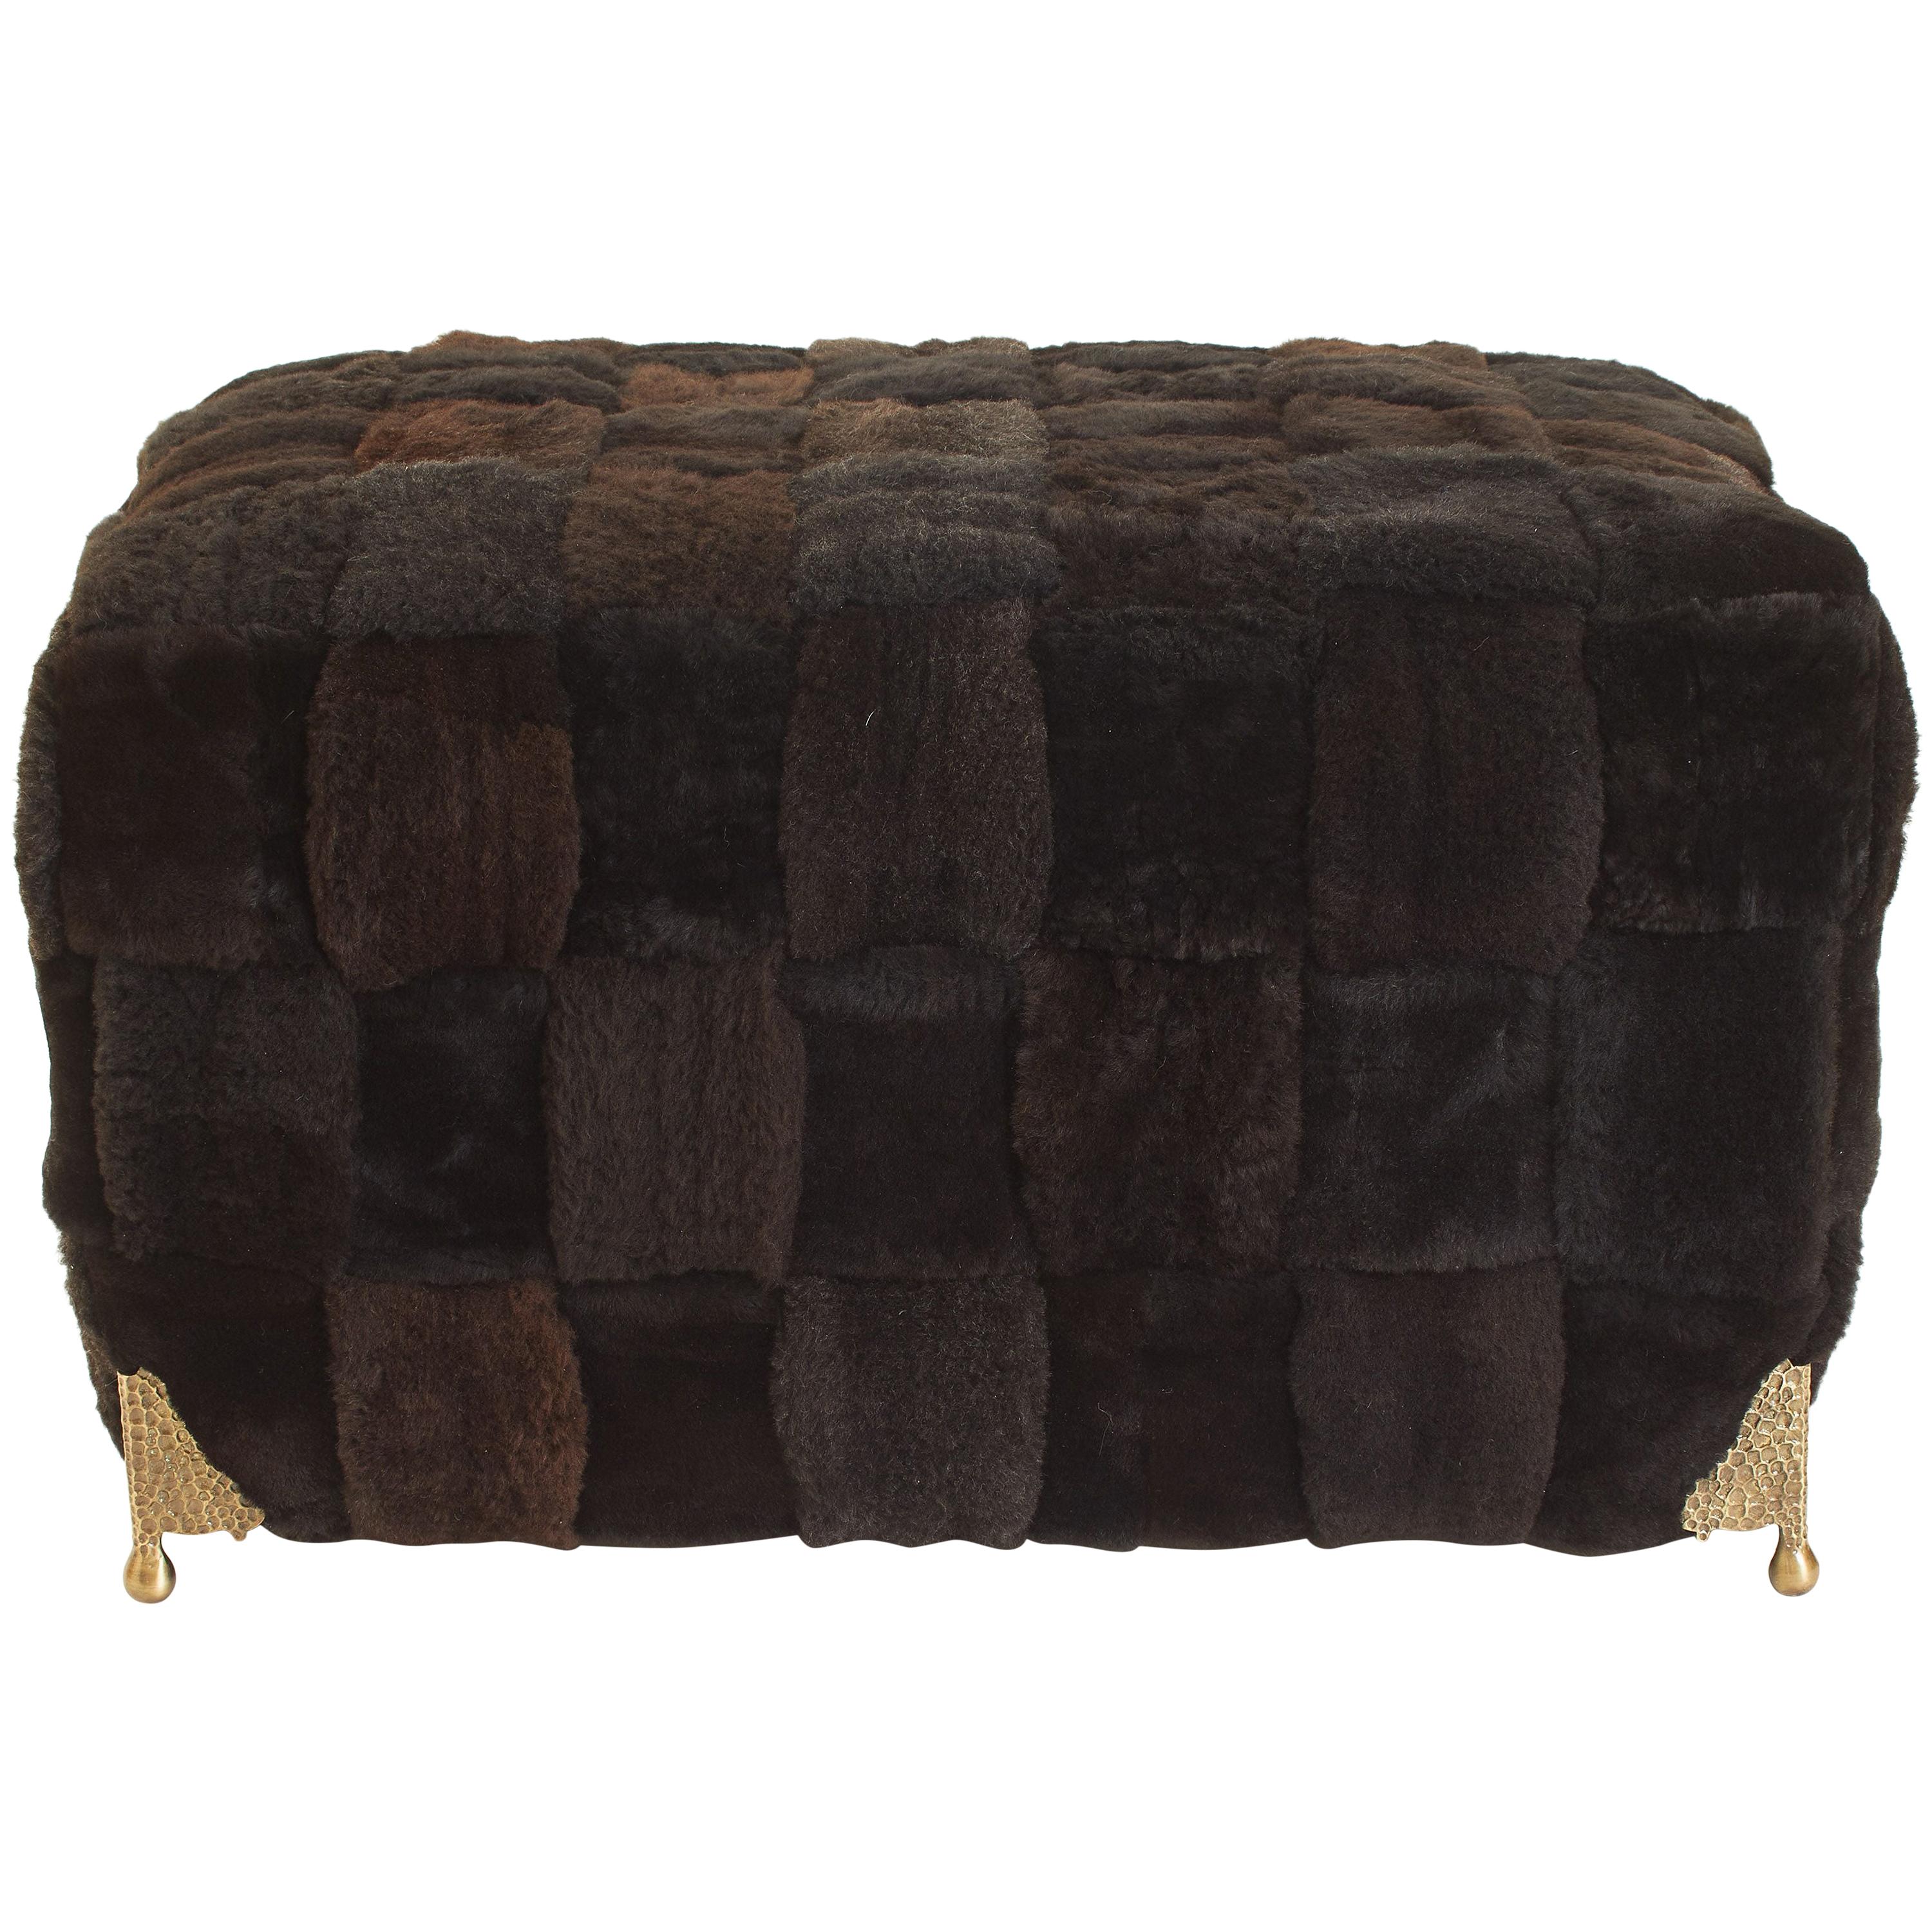 Contemporary Bespoke Brown Shearling Ottoman with Brass Legs